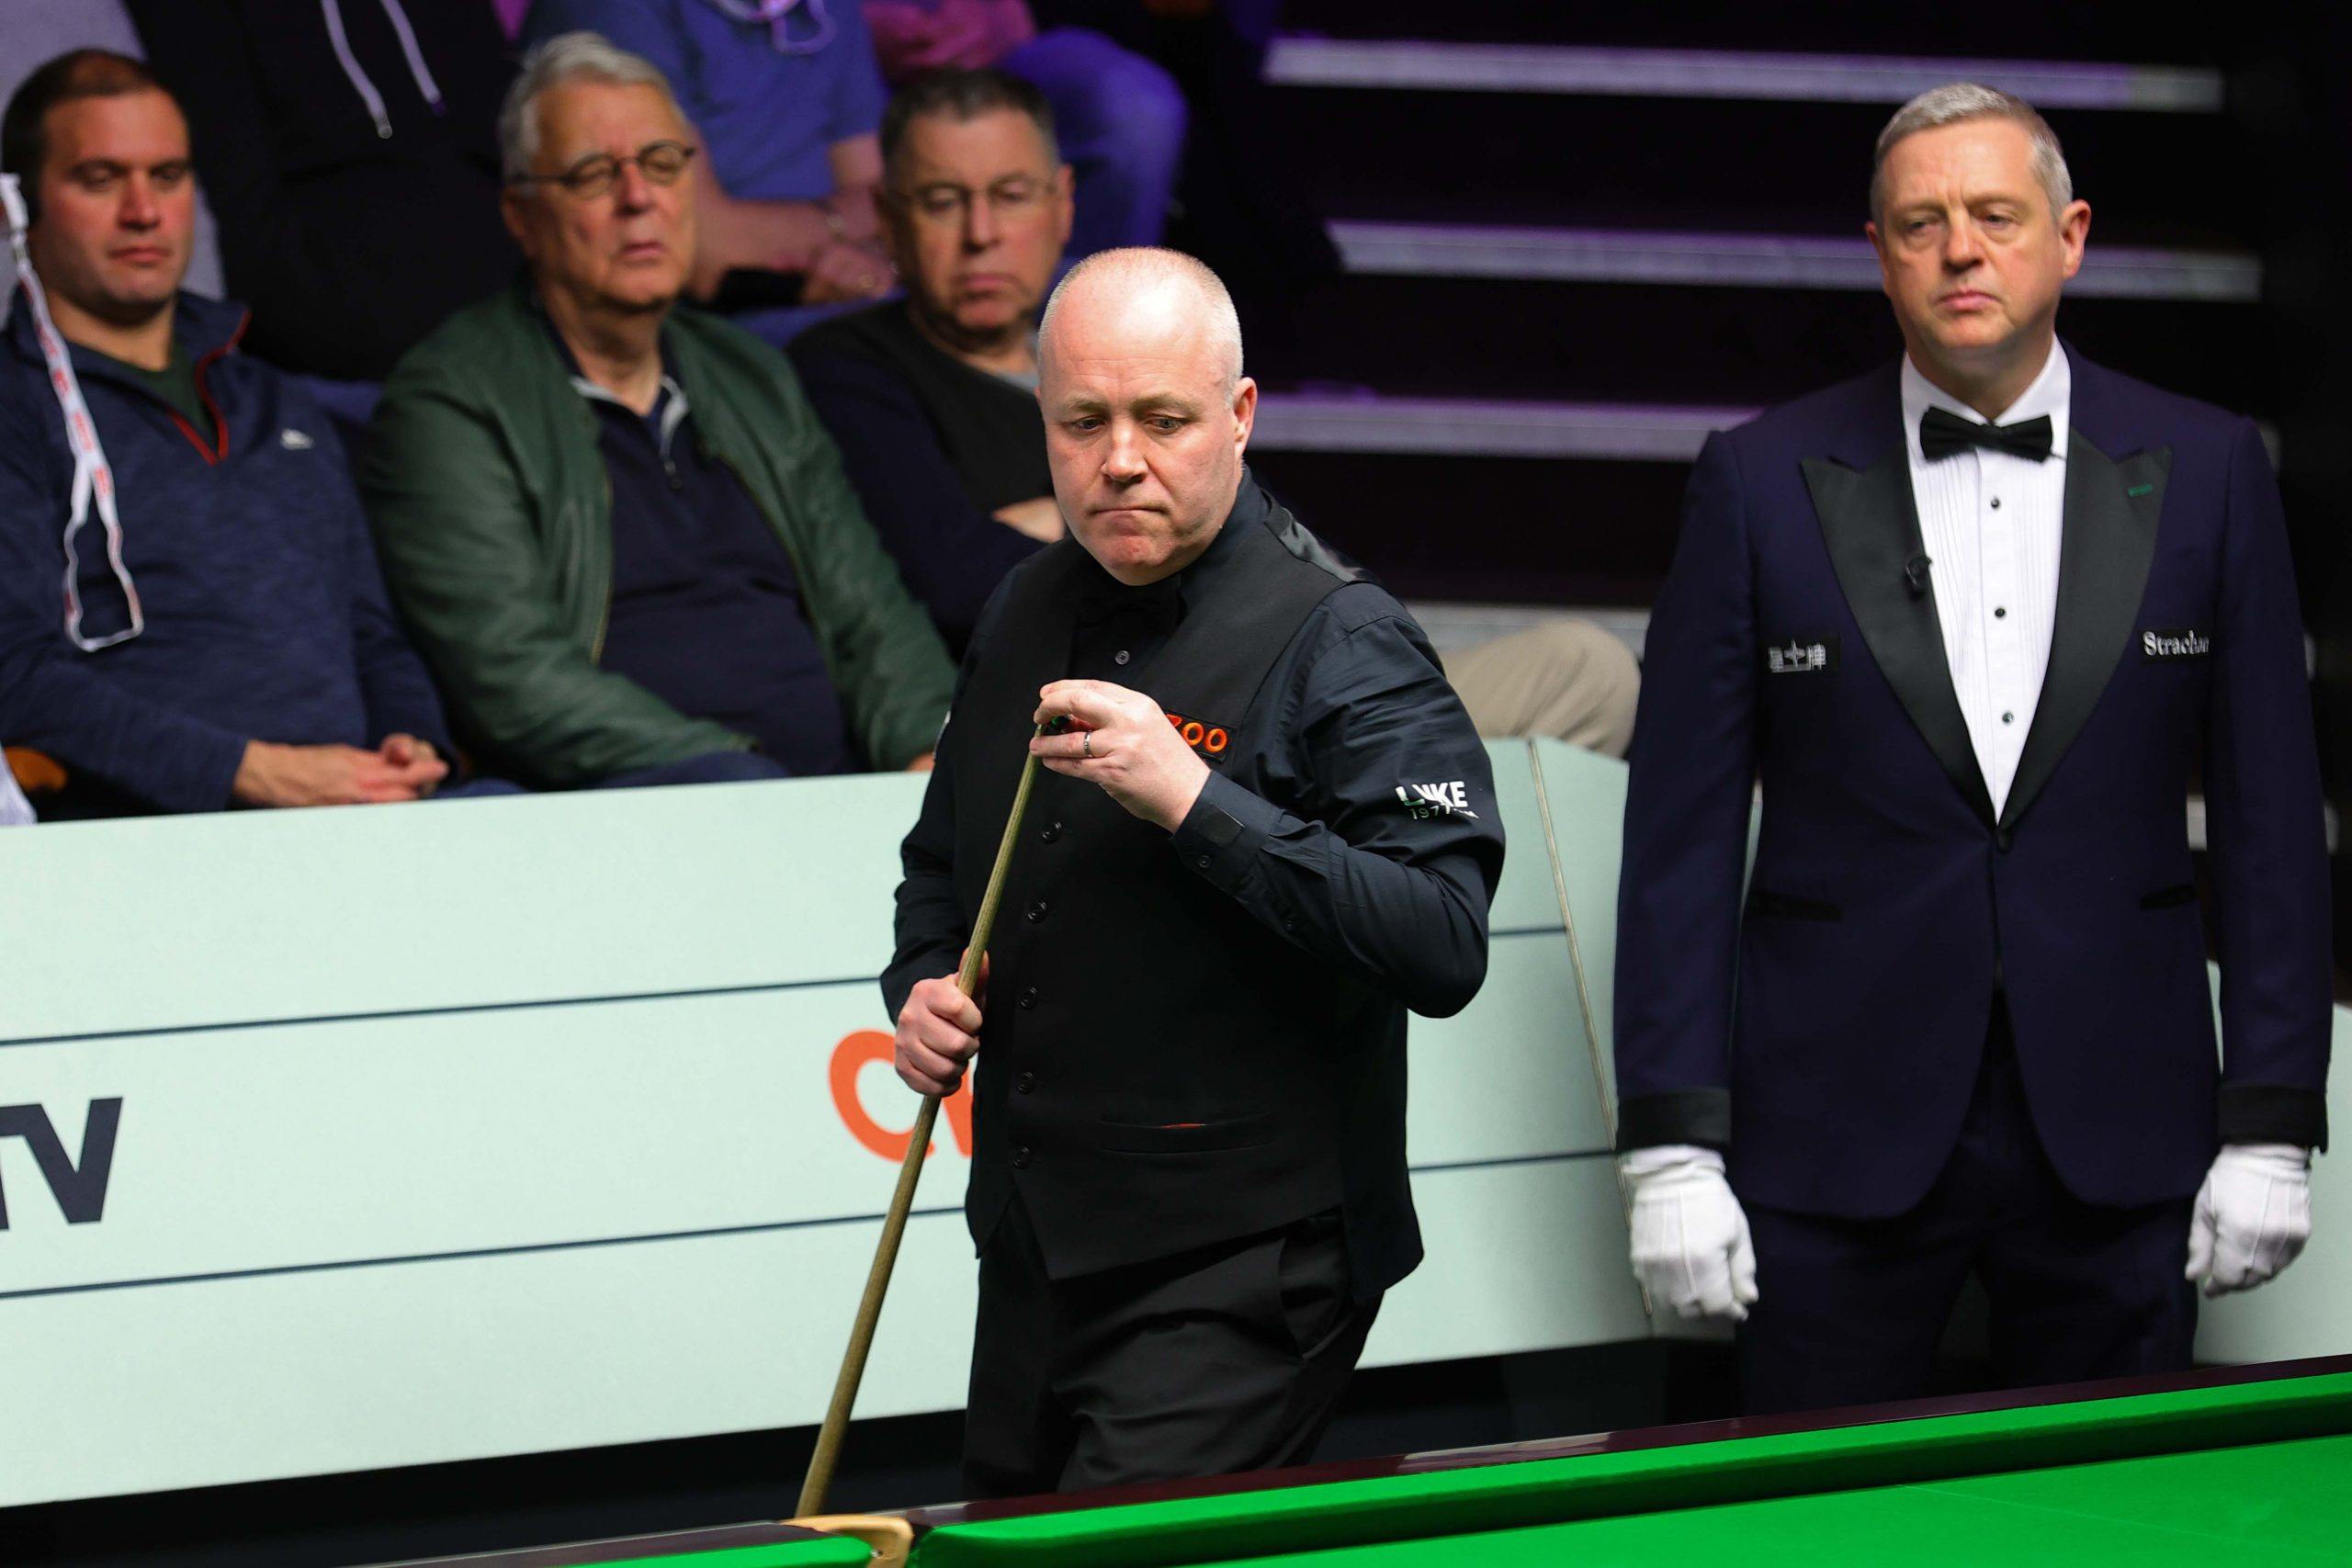 John Higgins is a four-time world champion having won his last title in 2011. Photo: World Snooker Tour